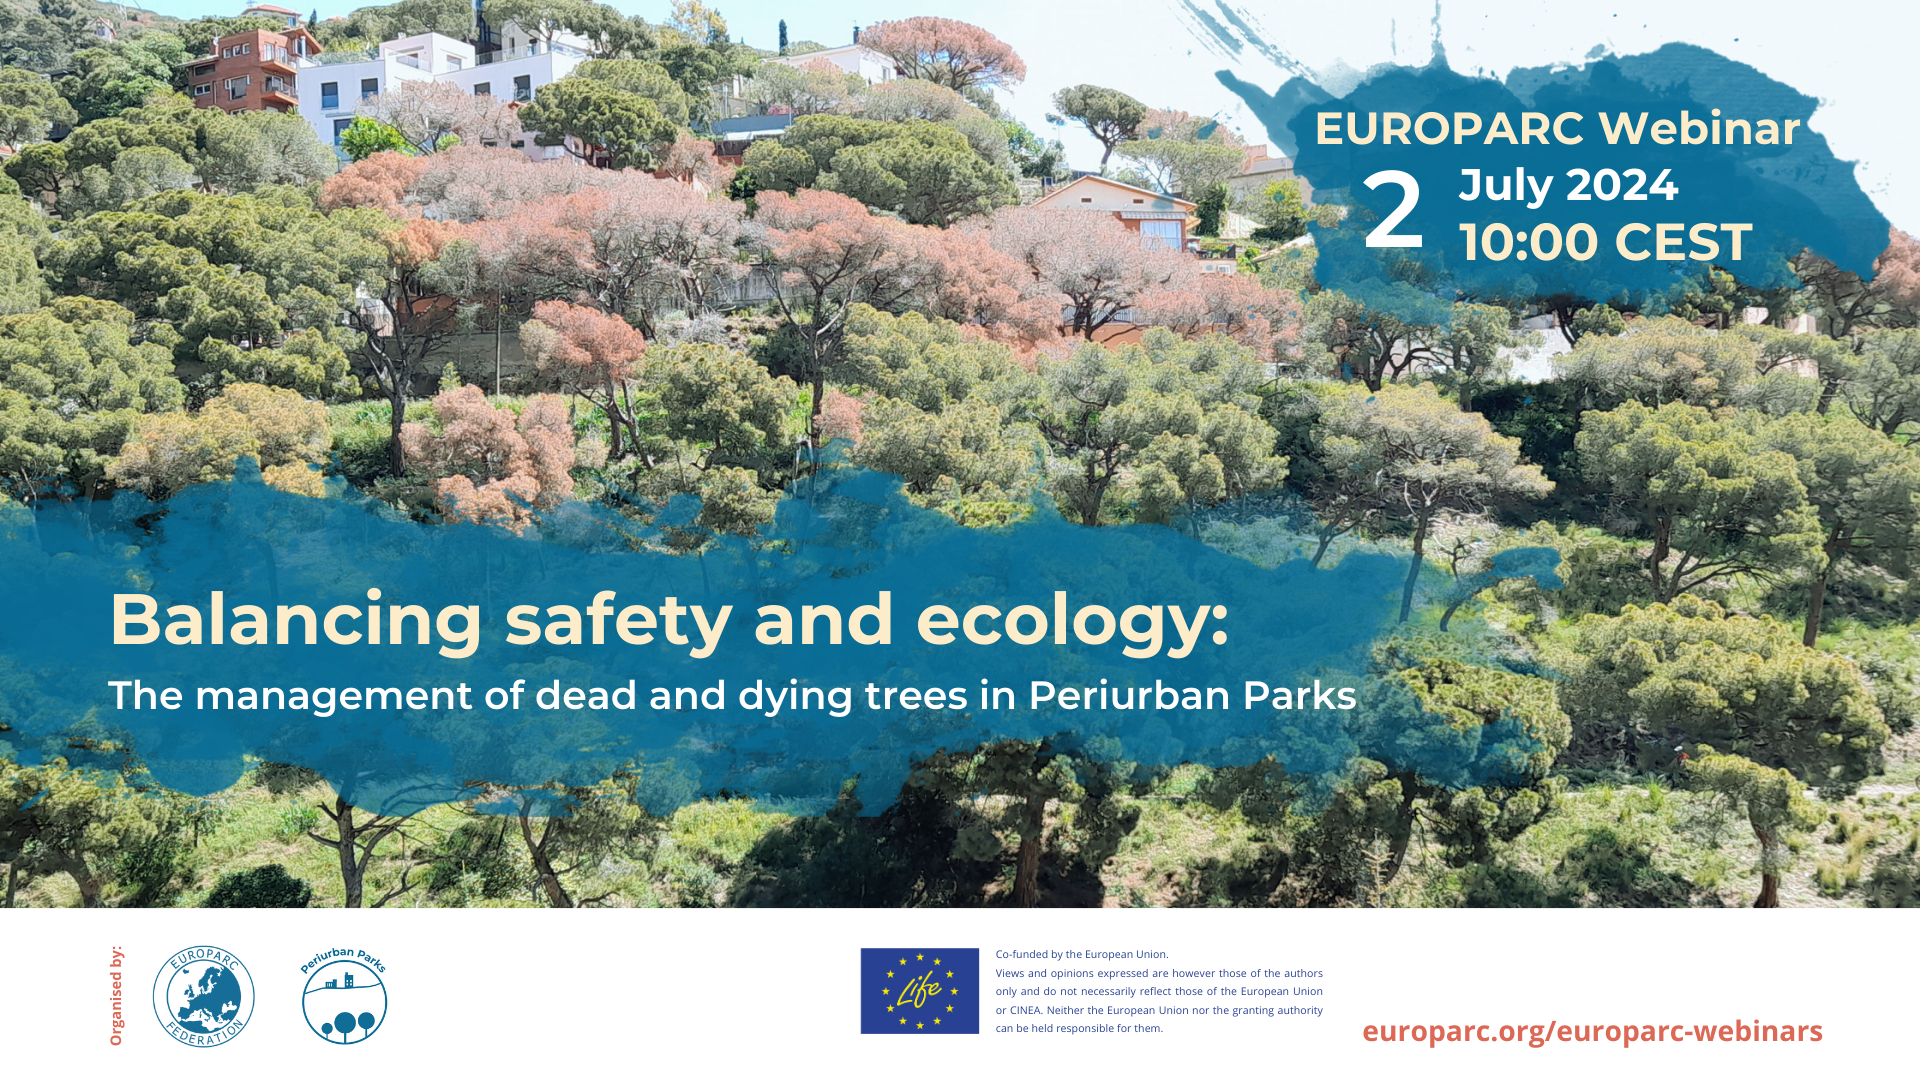 EUROPARC WEBINAR - Balancing safety and ecology: The management of dead and dying trees in Periurban Parks